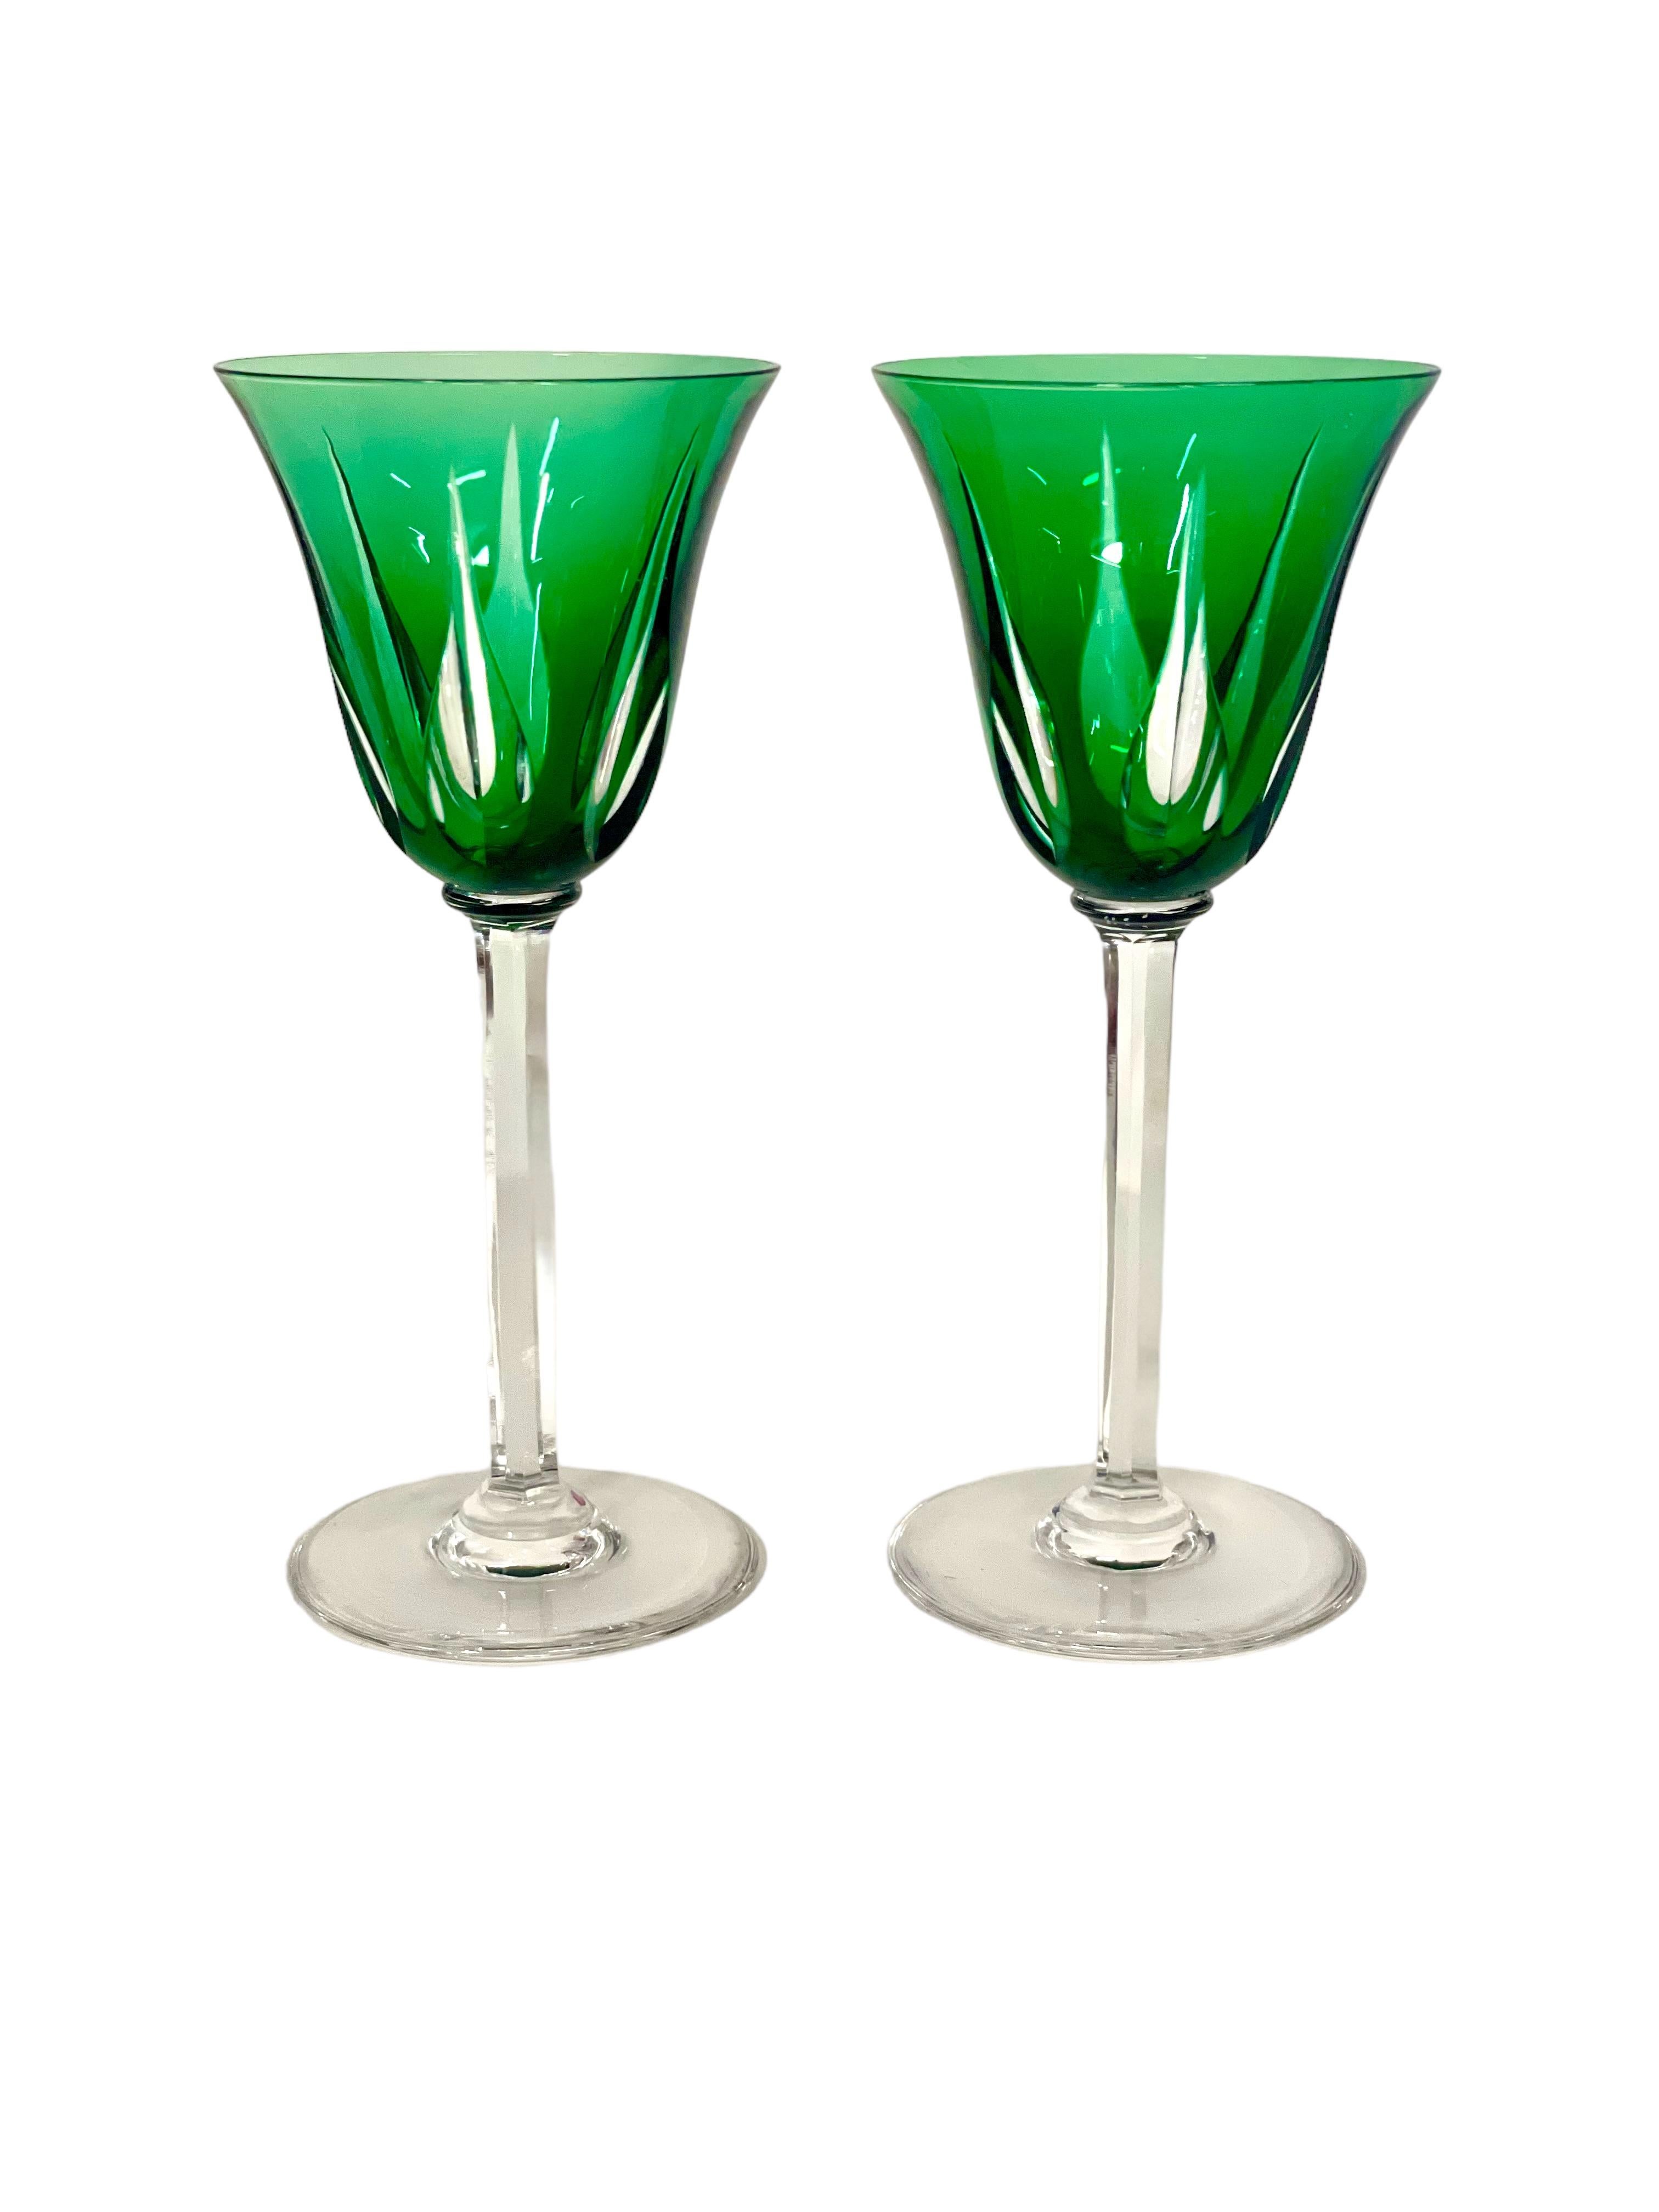 Saint Louis Set of Eleven Colourful Crystal Glasses  For Sale 4